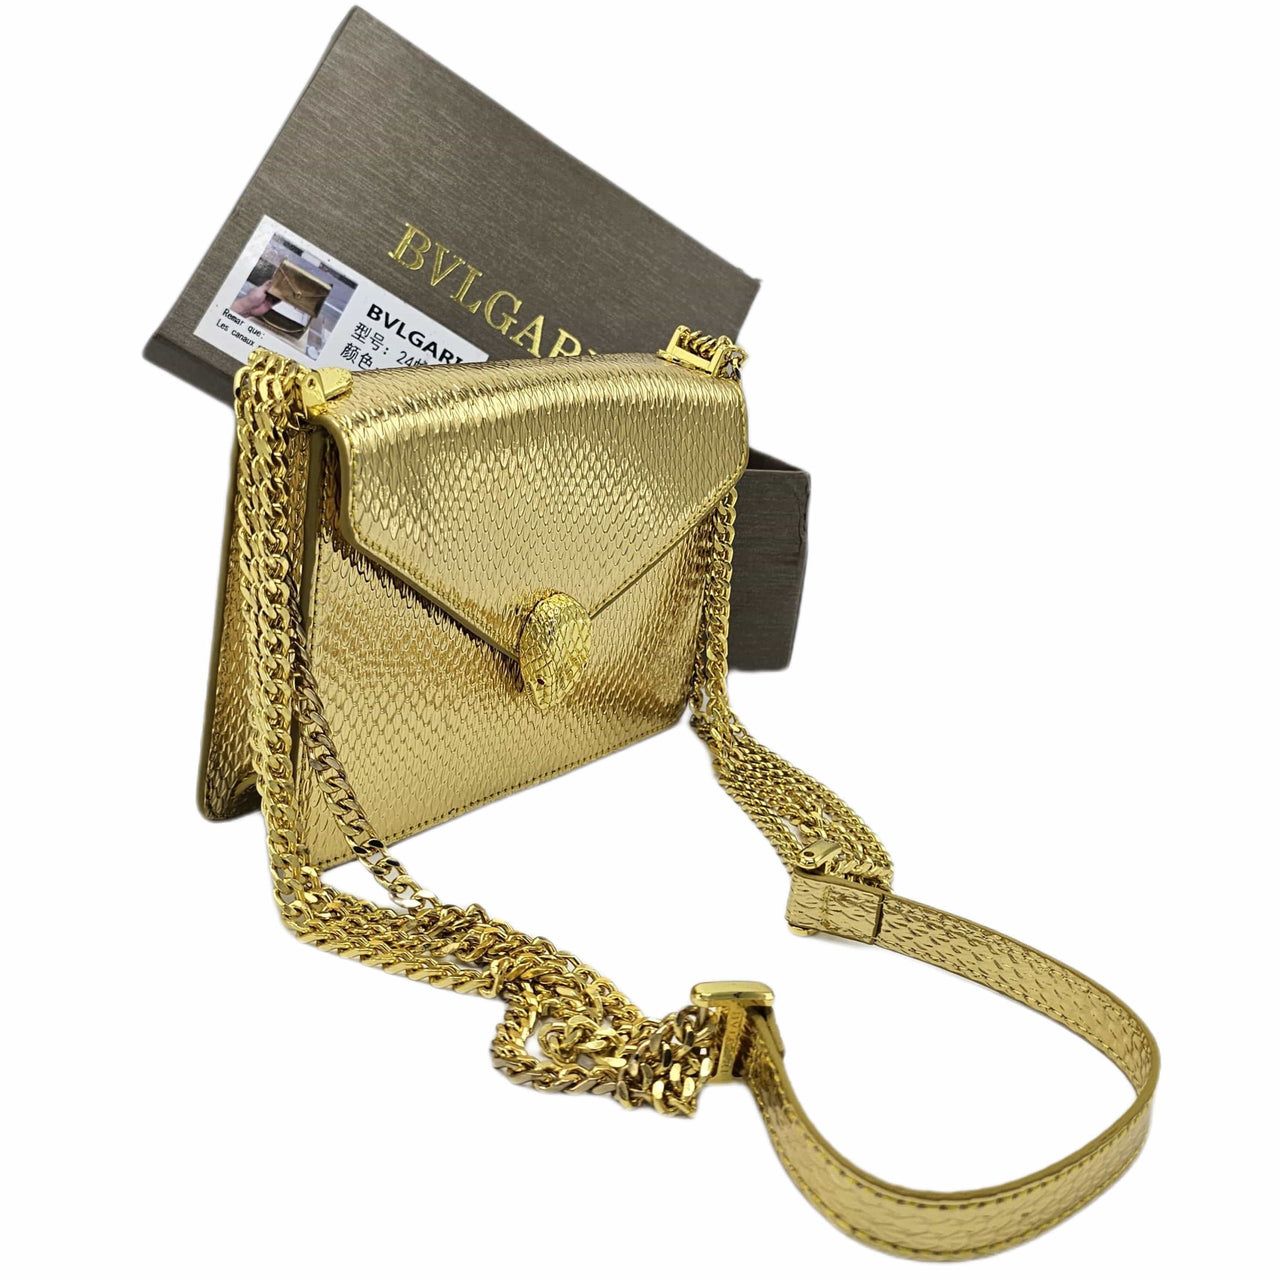 The Bag Couture Handbags, Wallets & Cases BVLGARI Serpenti Forever Small Shoulder Bag Gold